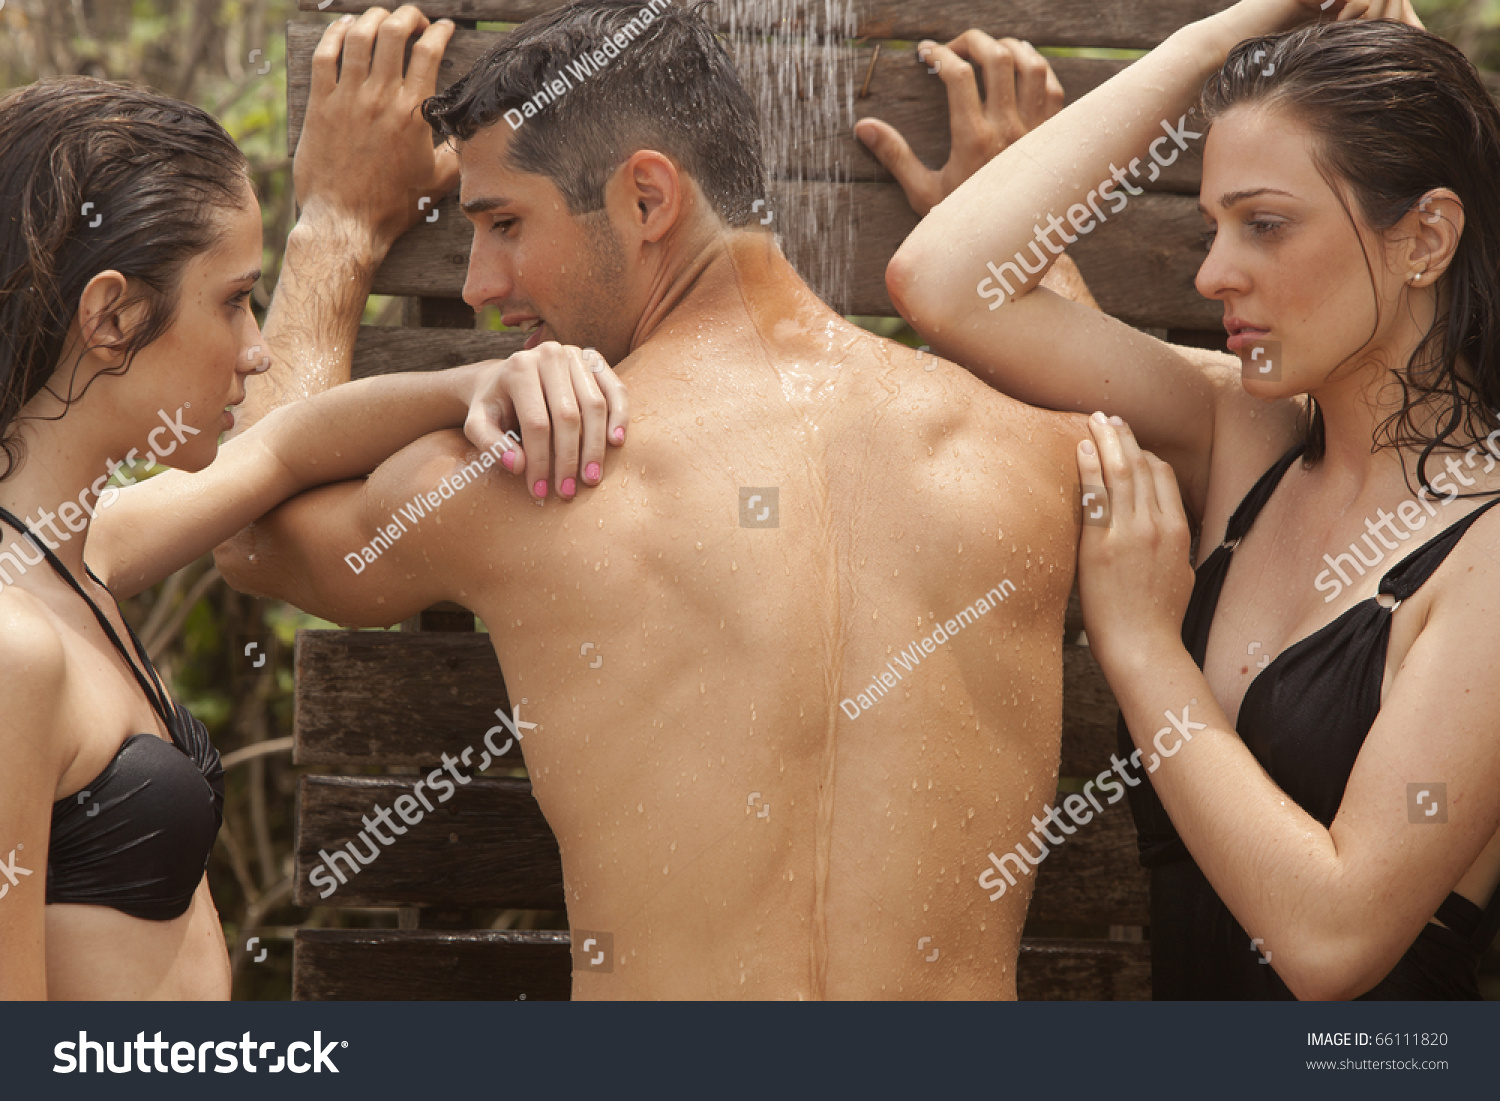 bill lack recommends 2 Girls One Shower